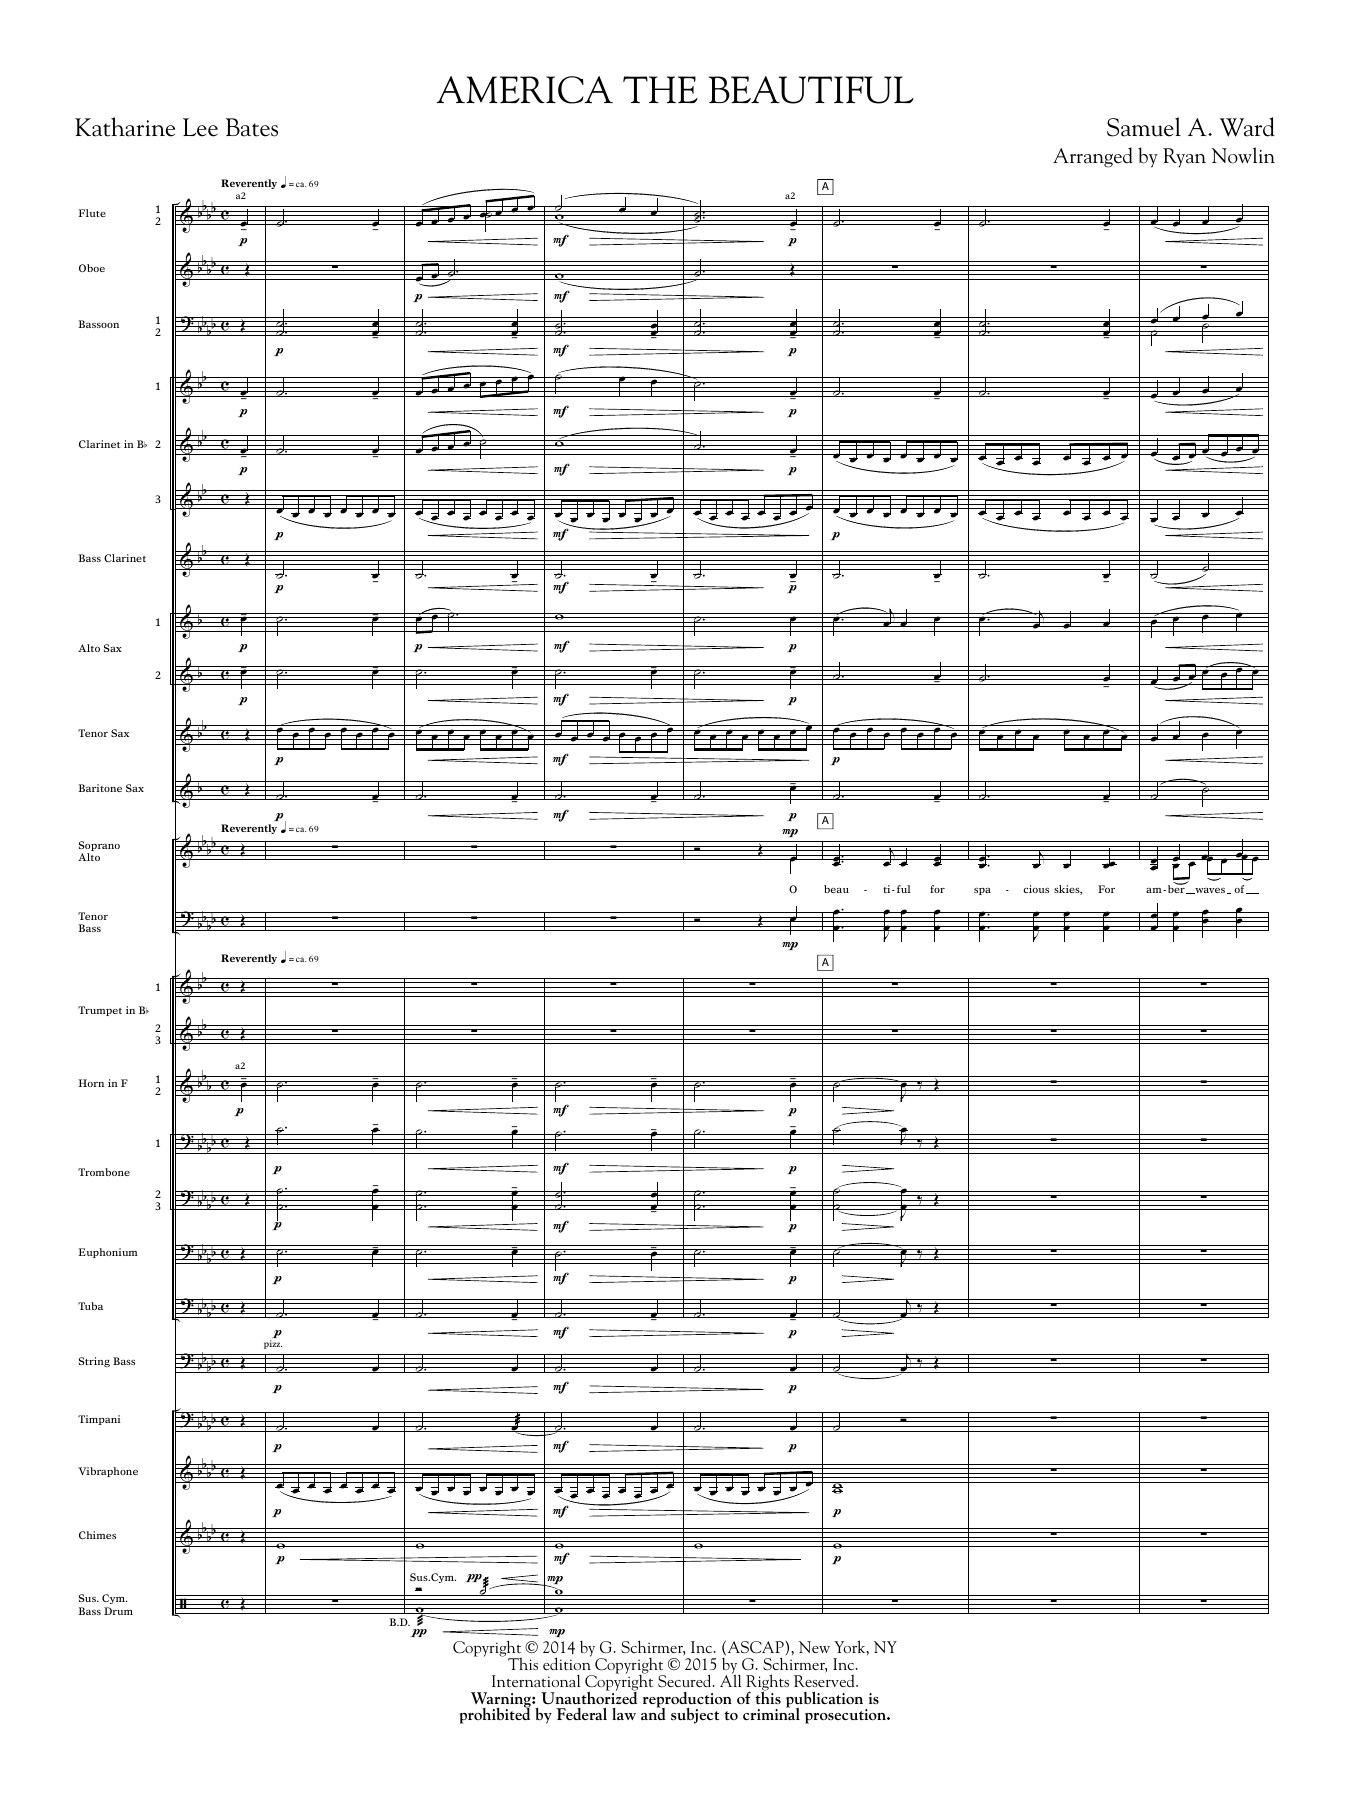 Ryan Nowlin America, the Beautiful - Score sheet music notes and chords. Download Printable PDF.